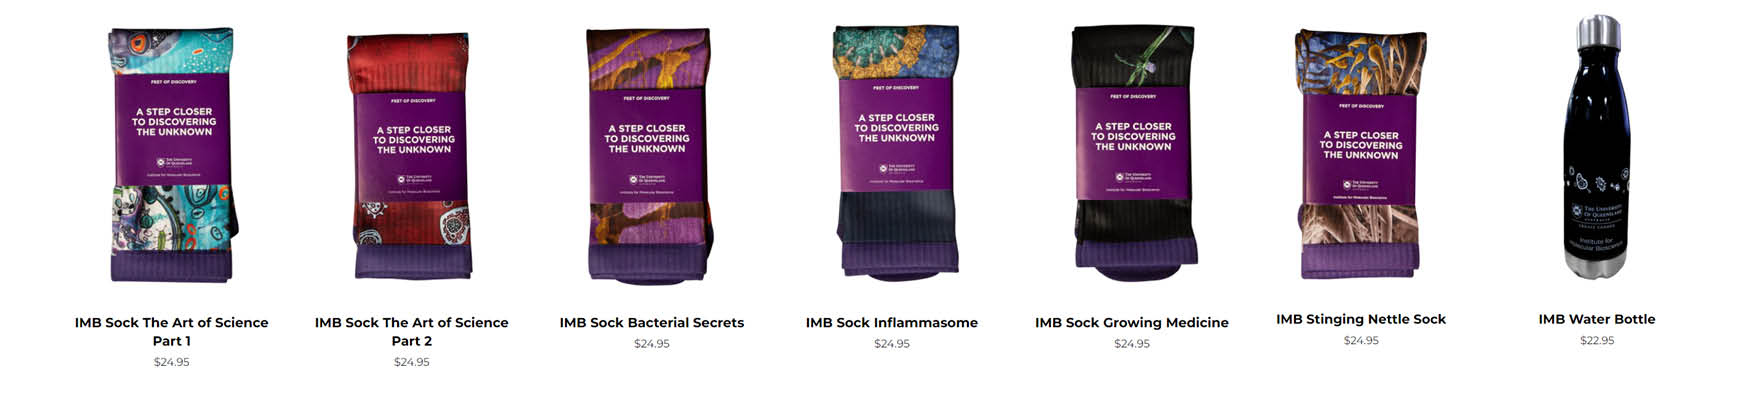 IMB socks and waterbottle